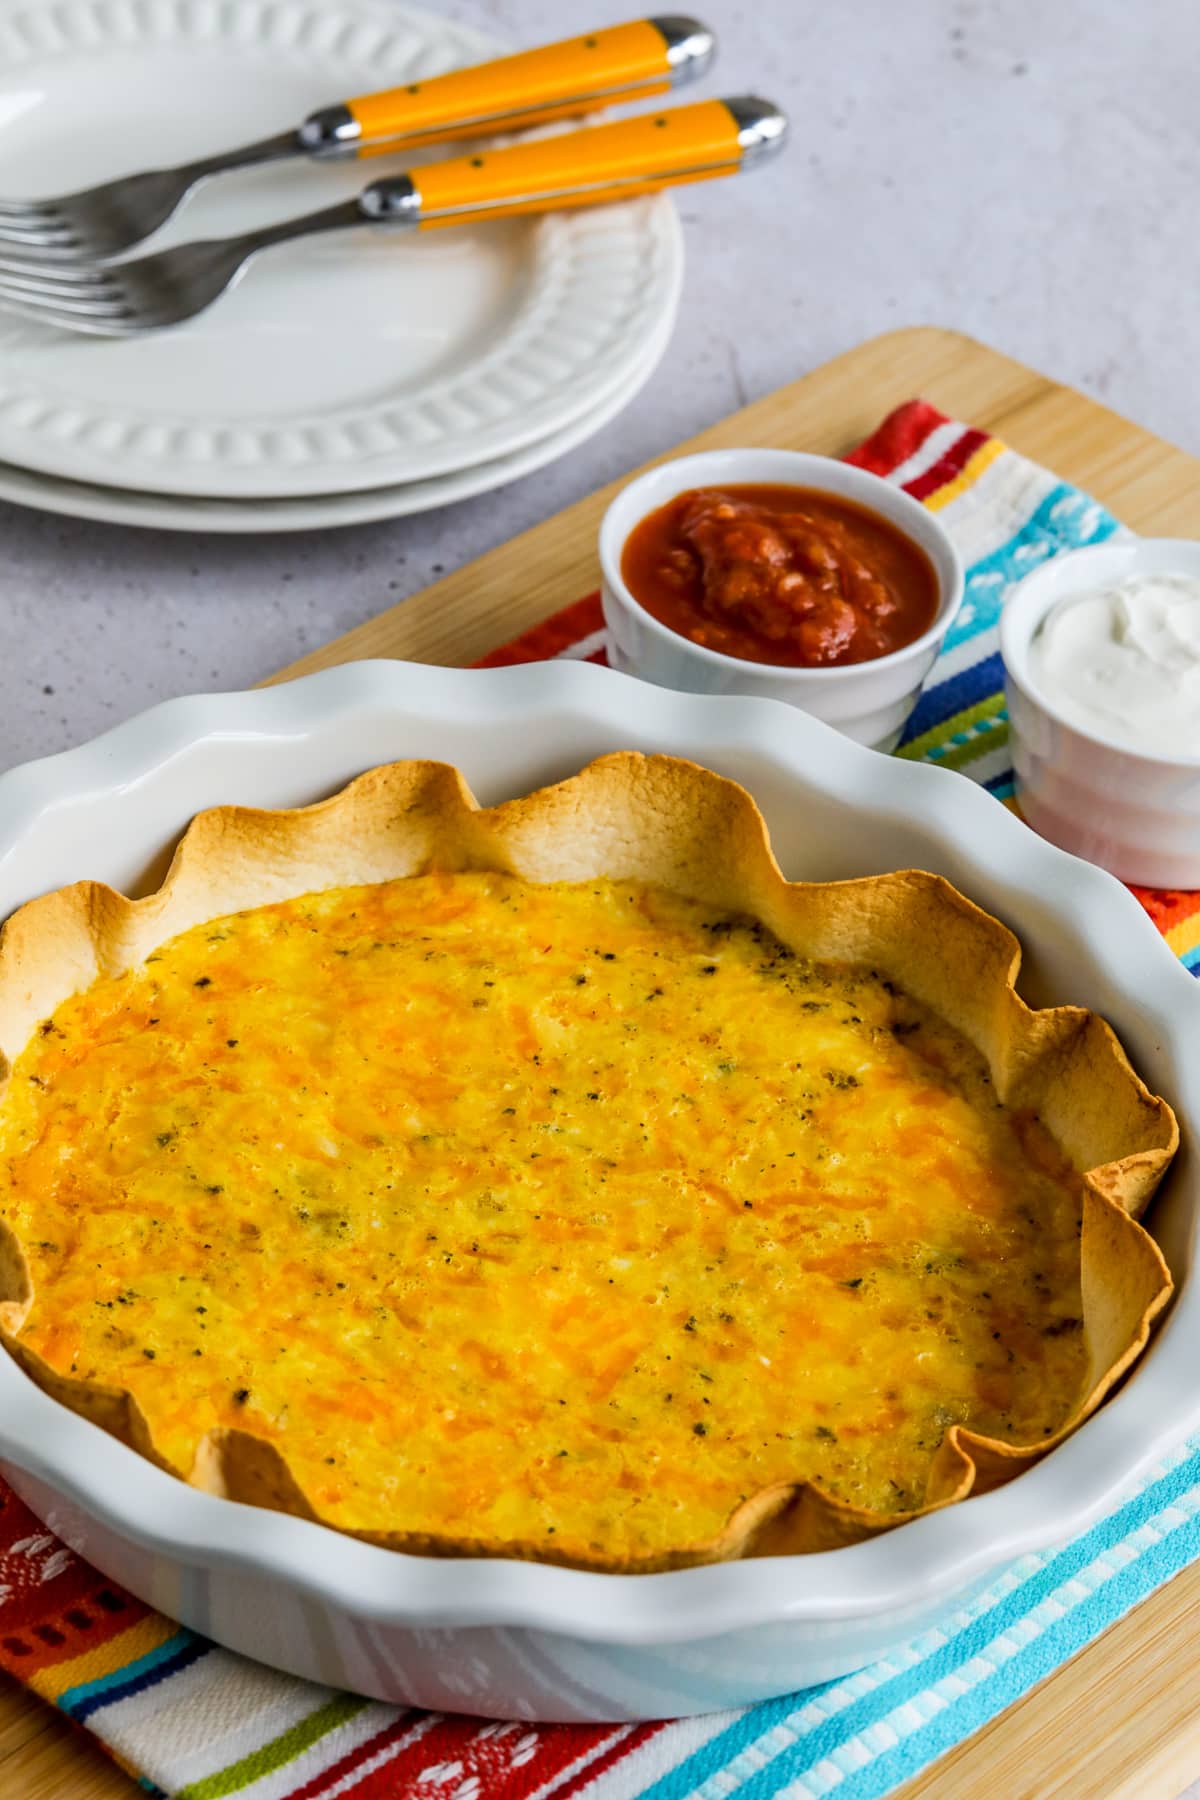 Tortilla Egg Bake shown in white pie dish with sour cream and salsa on the side and plates/forks in back.